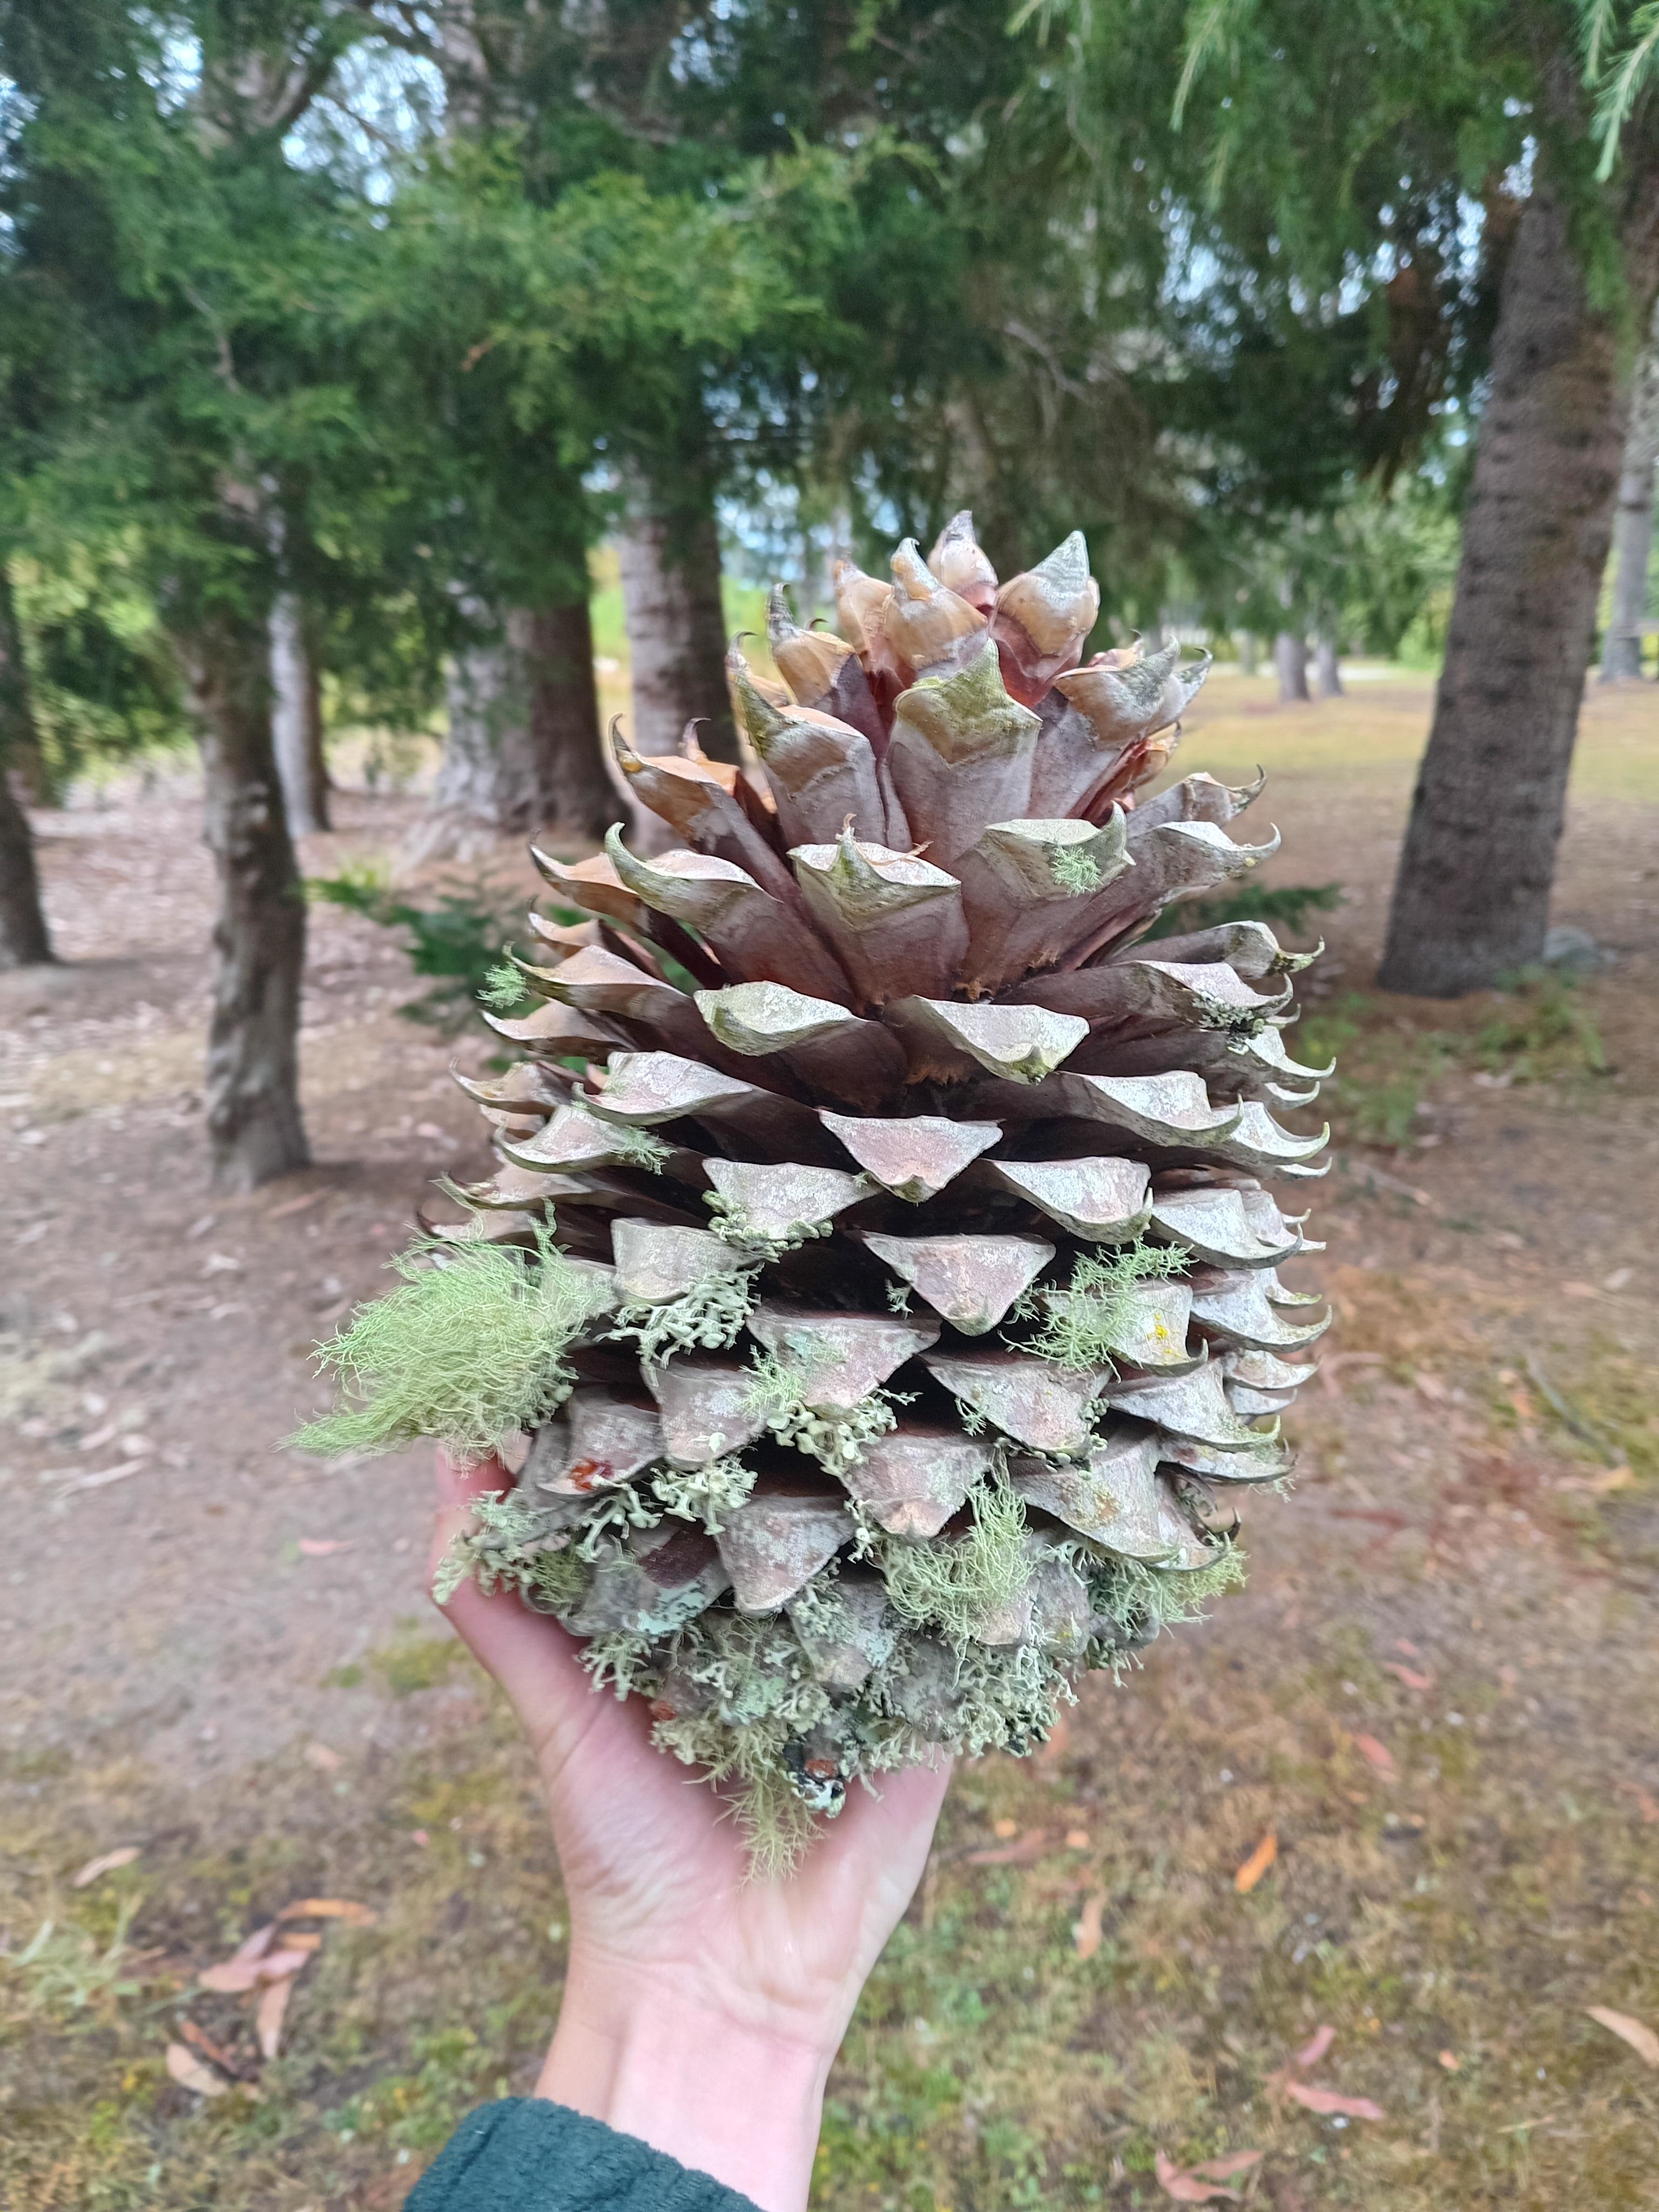 A huge pine cone being held by a hand and soaring above it